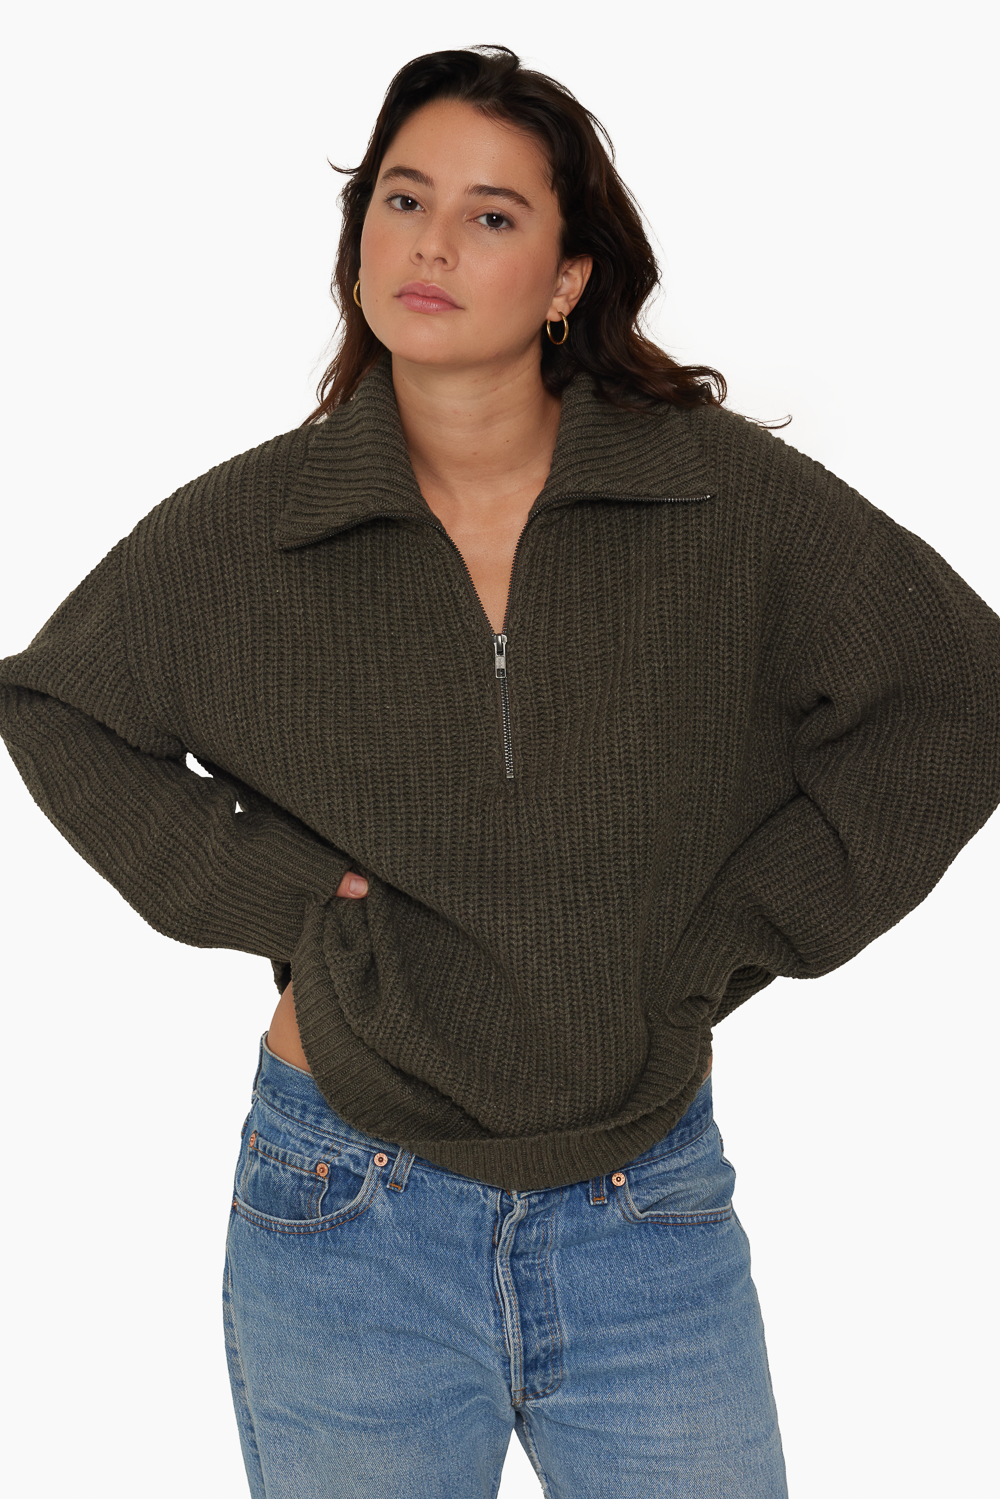 CHUNKY RIB KNIT COLLARED QUARTER ZIP - SHADOW Featured Image